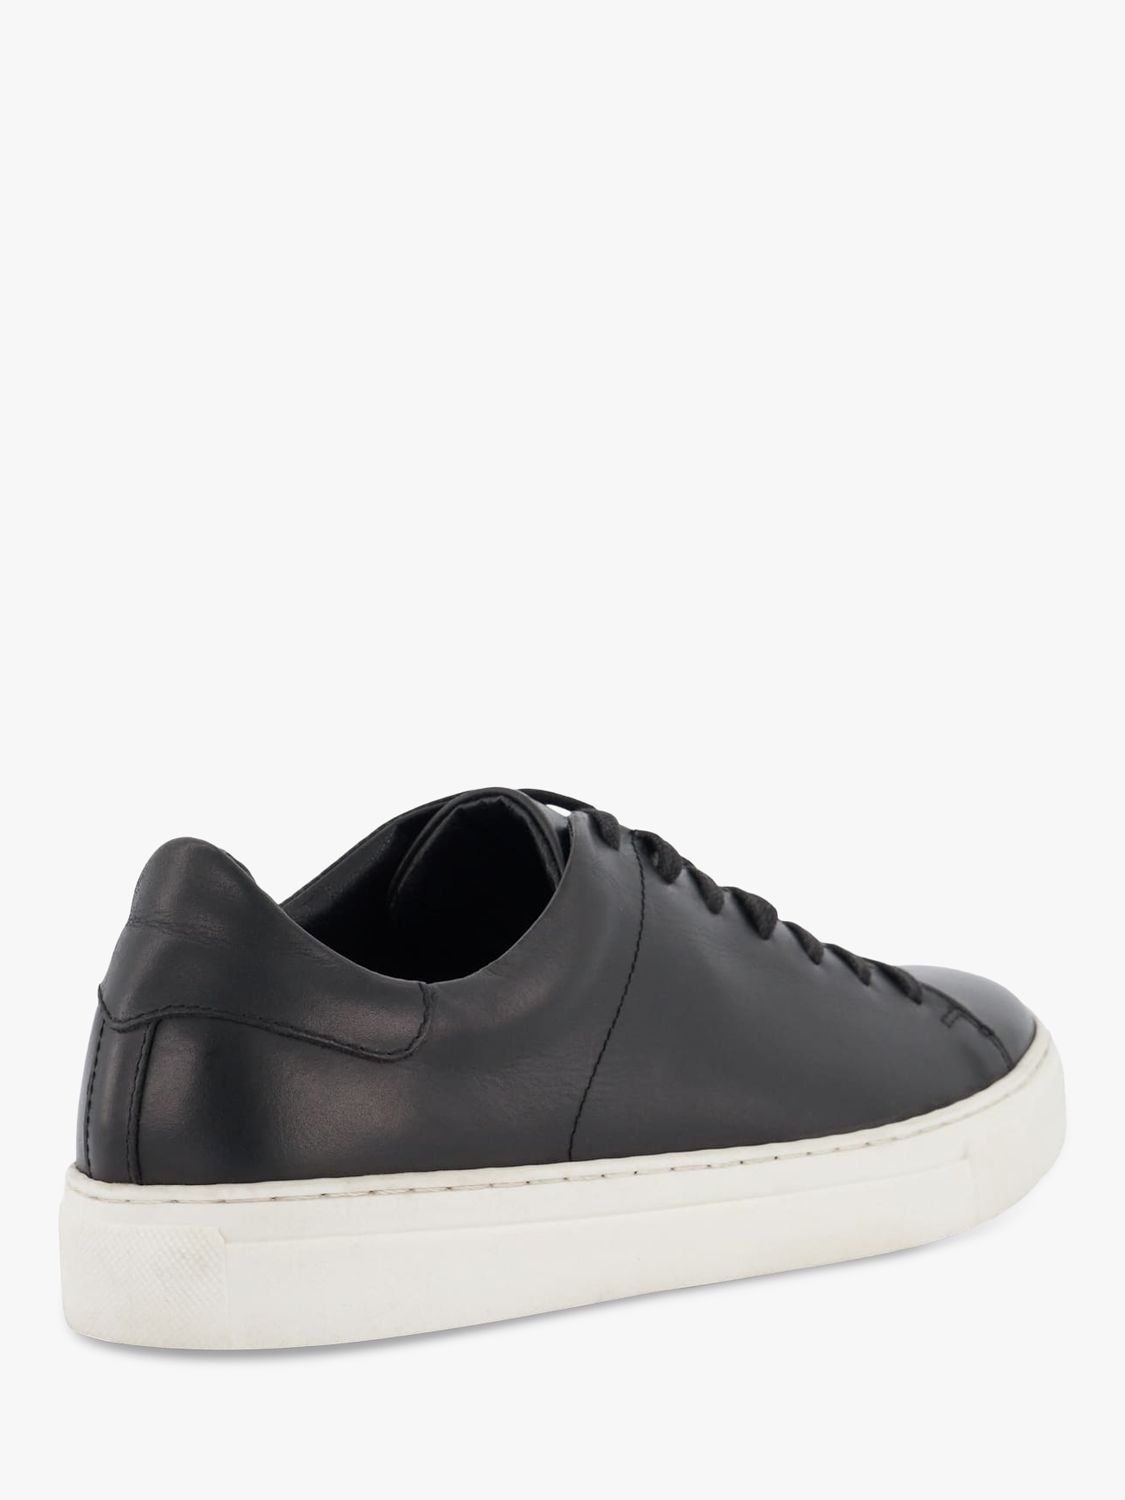 Dune Terrence Leather Trainers, Black